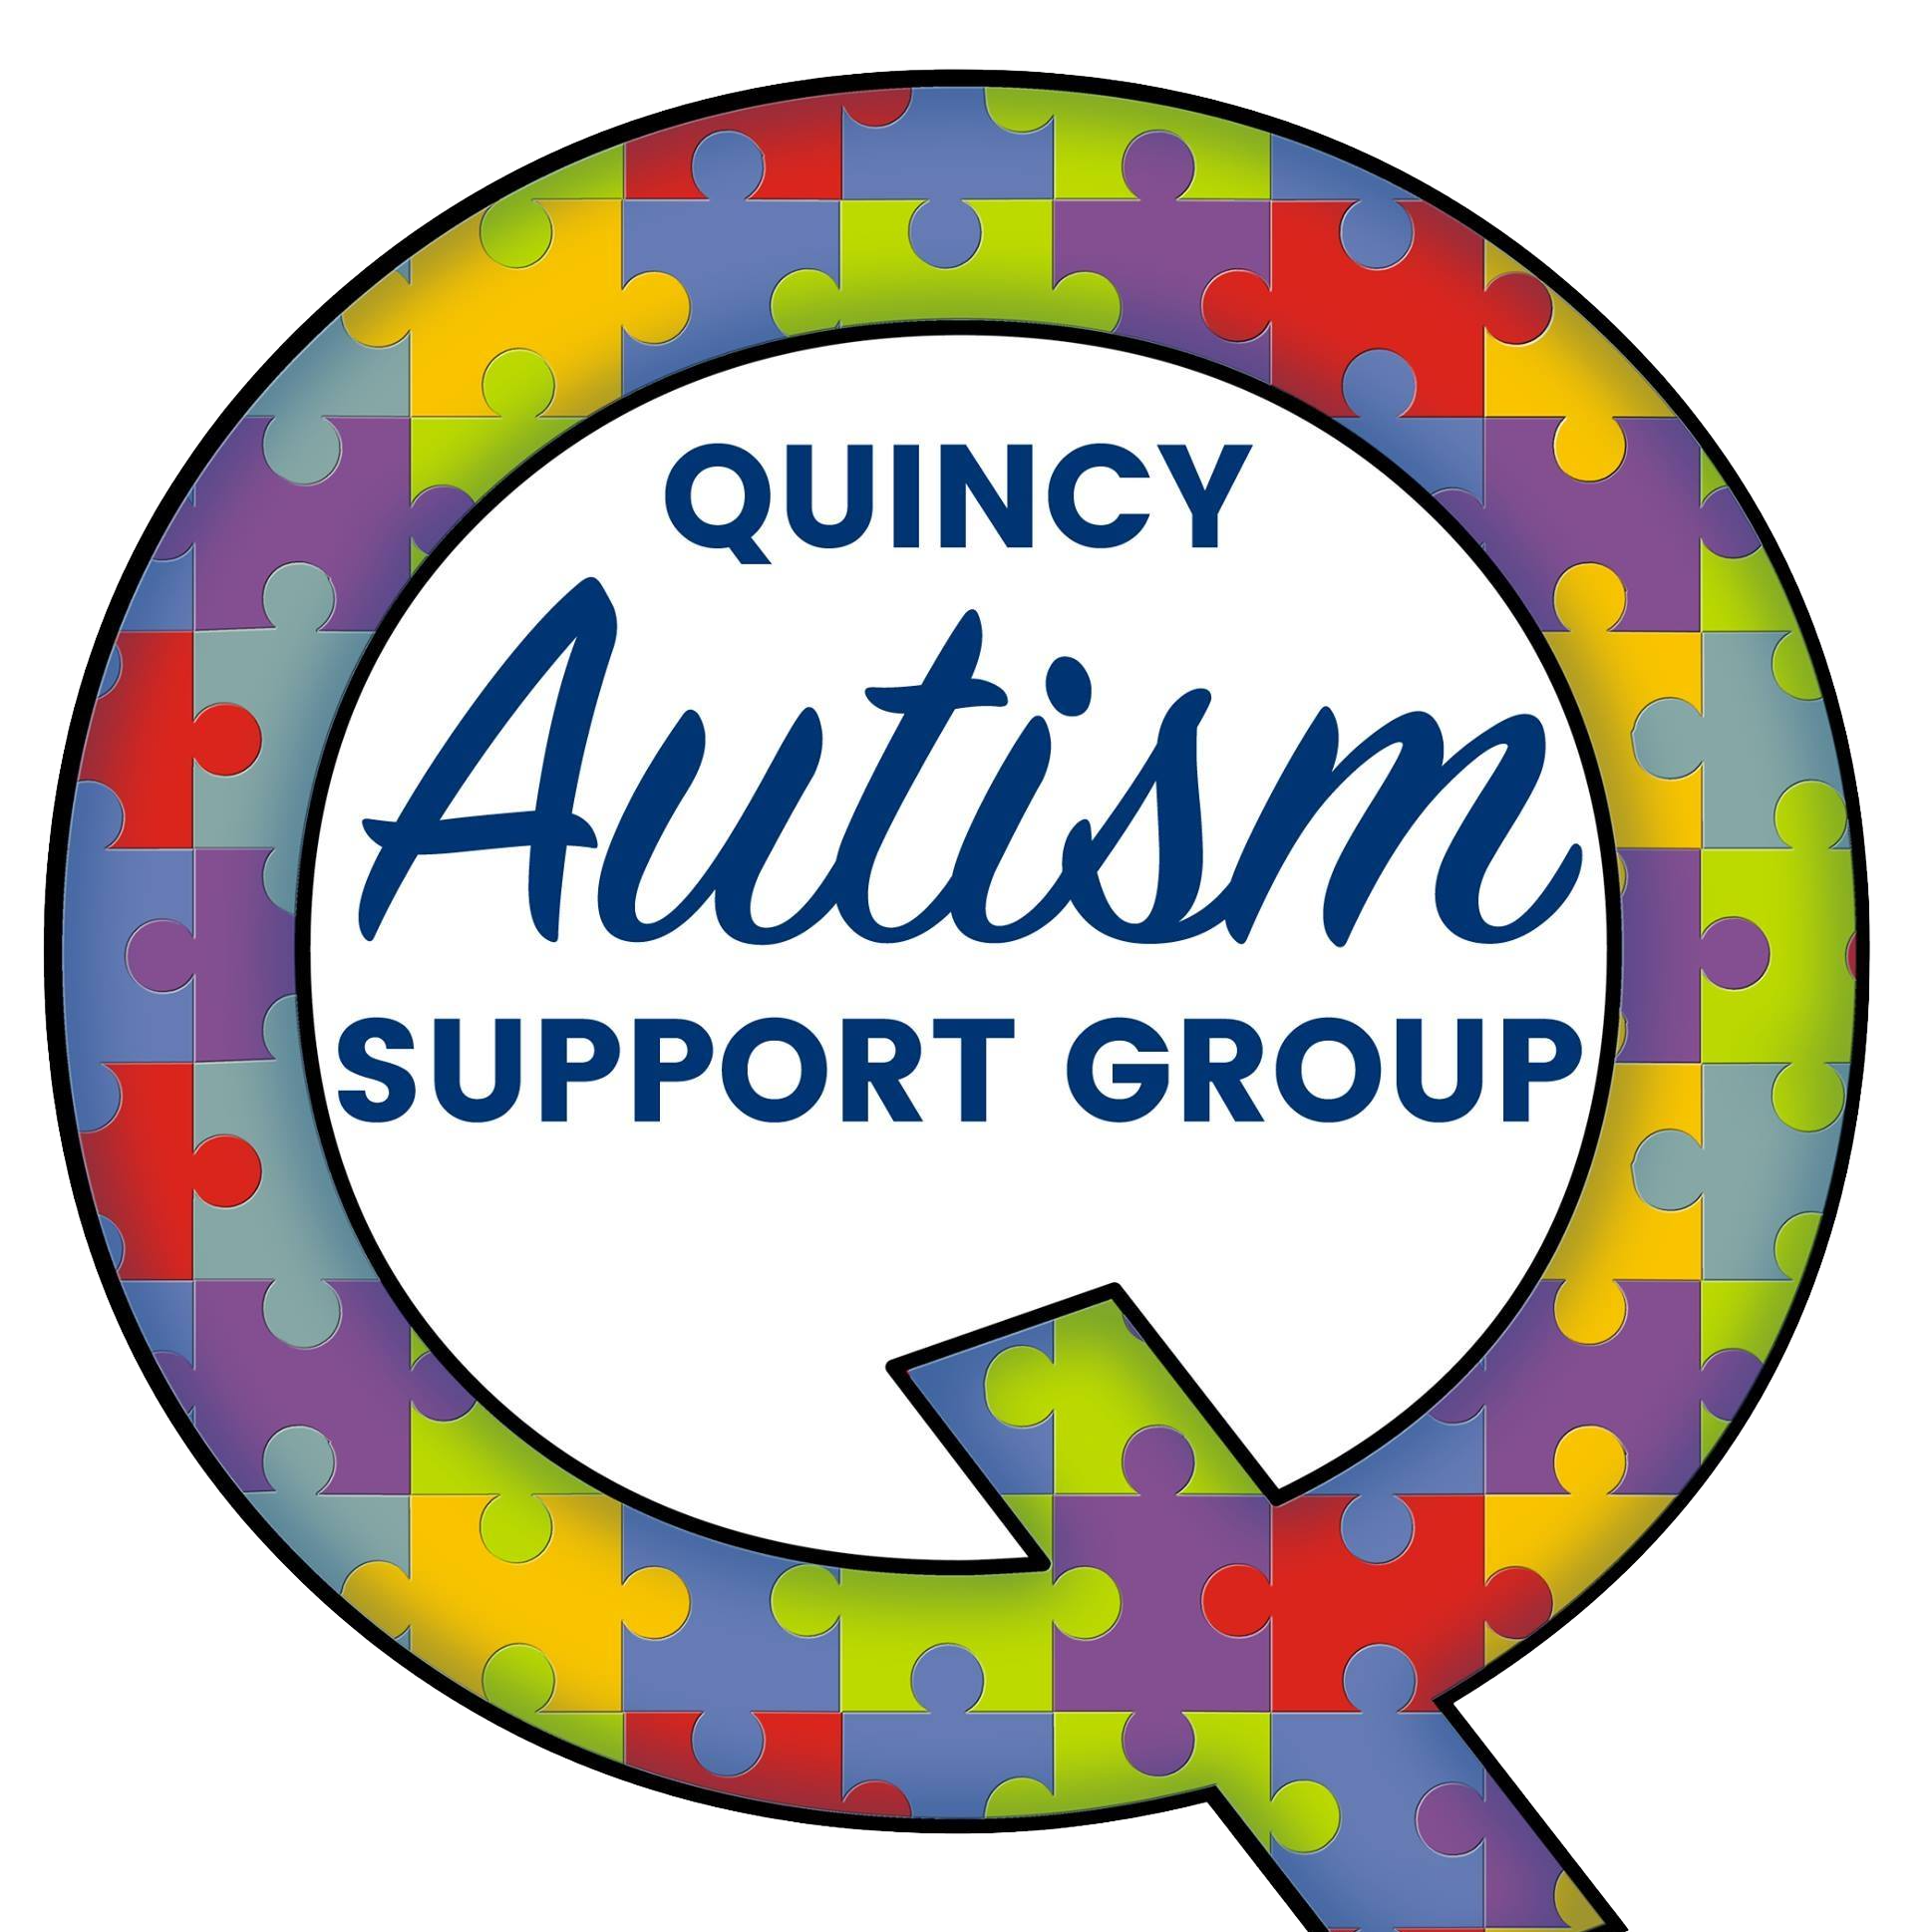 Quincy Area Autism Support Group logo